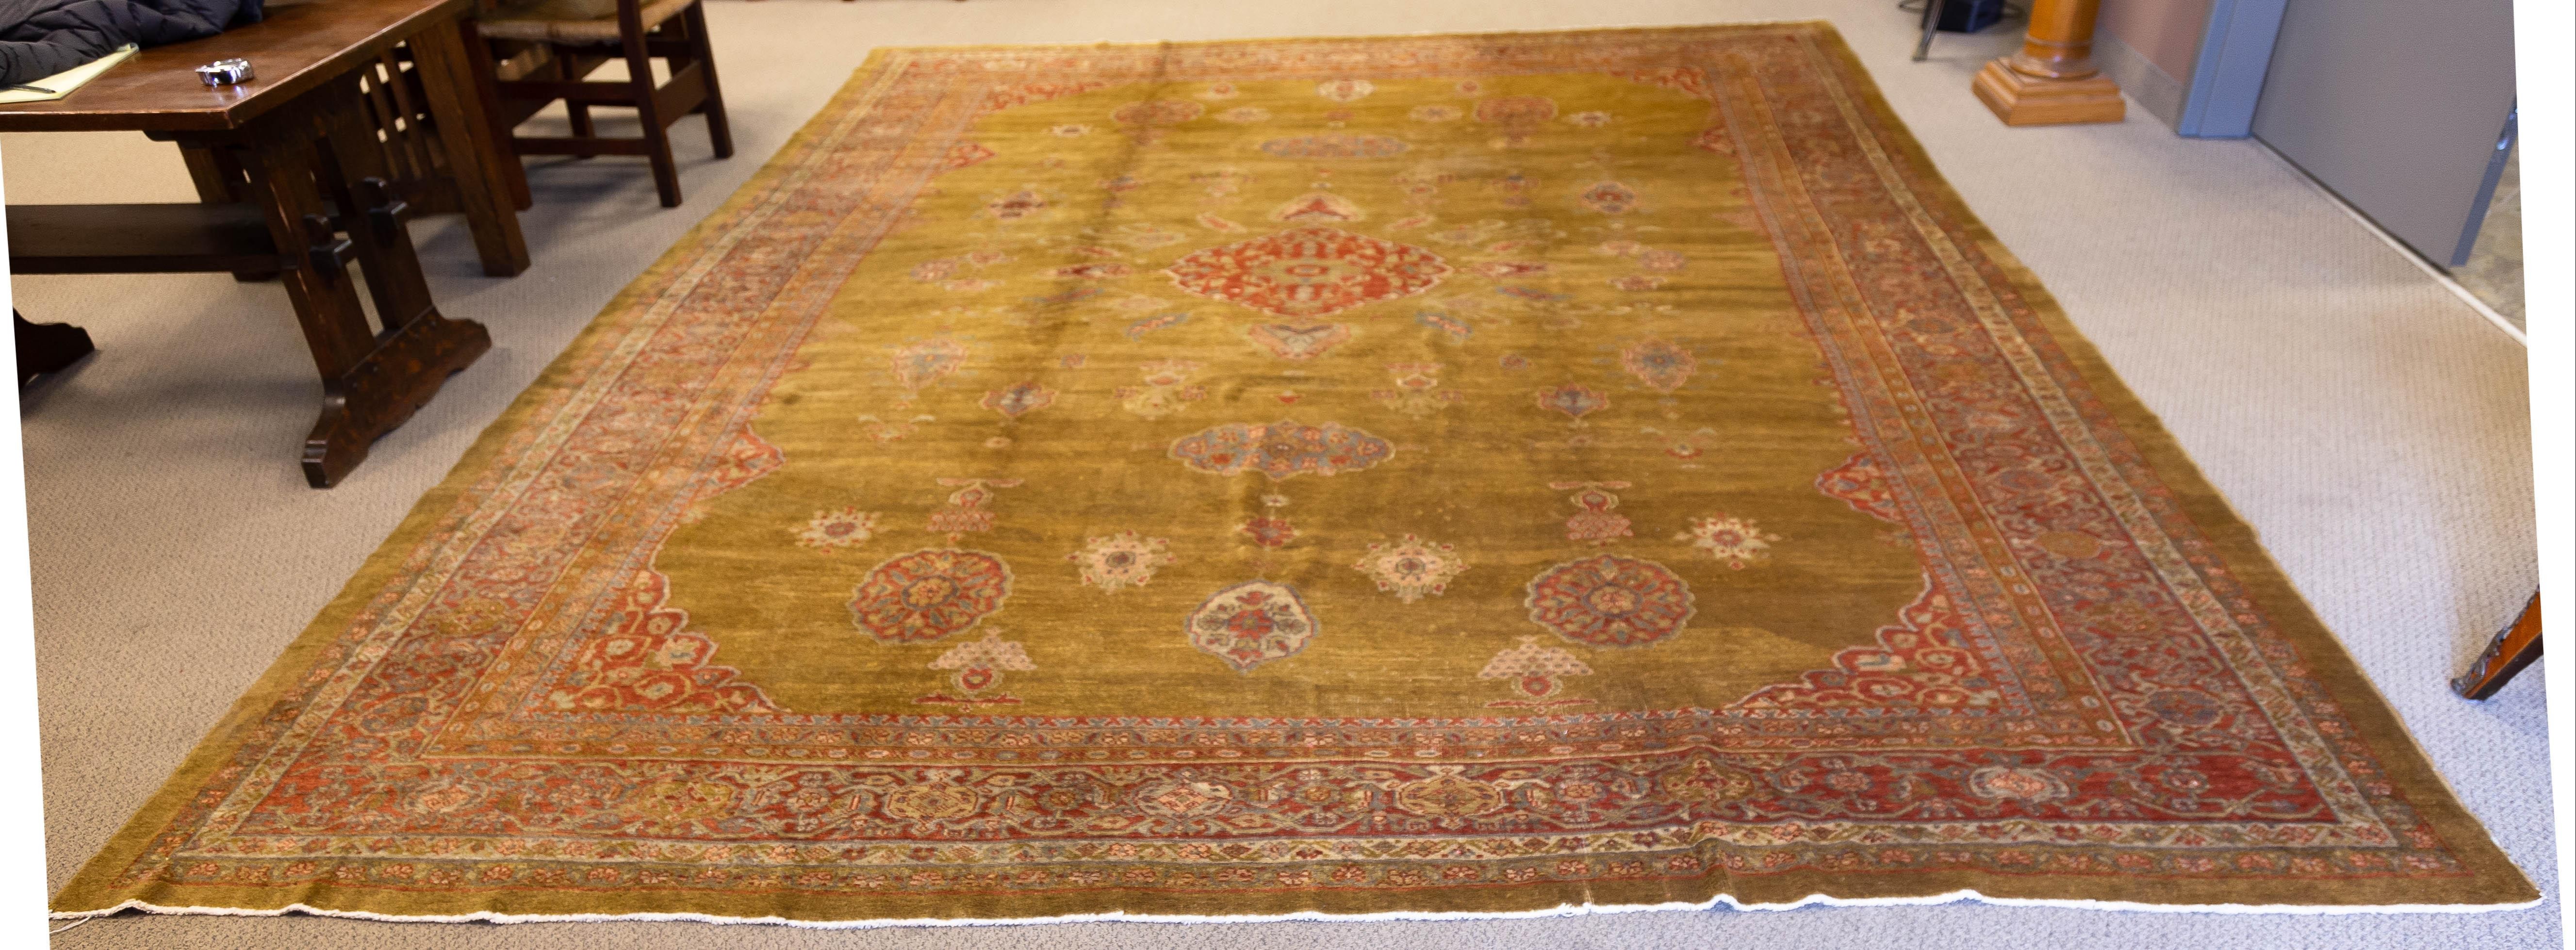 SULTANABAD ORIENTAL RUG Early 20th